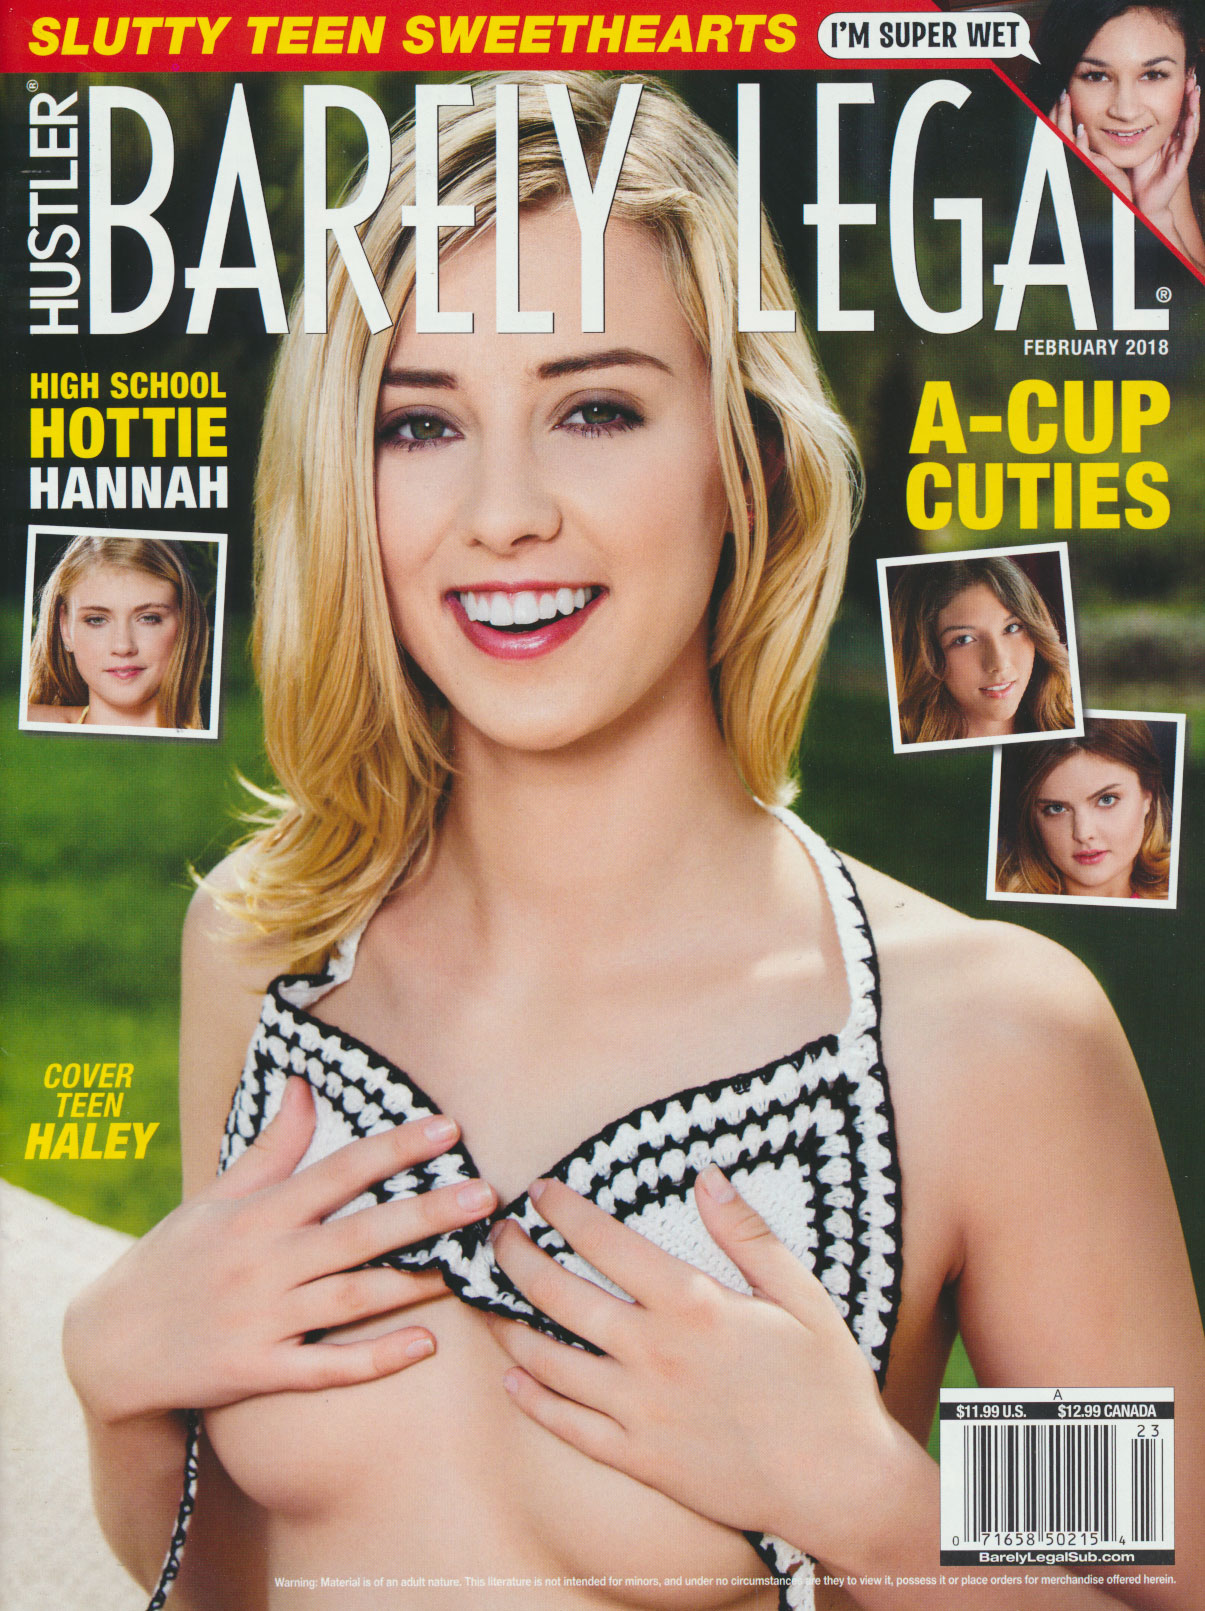 Barely Legal February 2018, Barely Legal February 2018 Adult Magazine Back Issue Published by Hustler. Magazines Dedicated to Young Teenage Girls Who Just Attained Legal Age. Covergirl Haley Reed (Nude) photographed by Victor Lightworship., Covergirl Haley Reed (Nude) photographed by Victor Lightworship